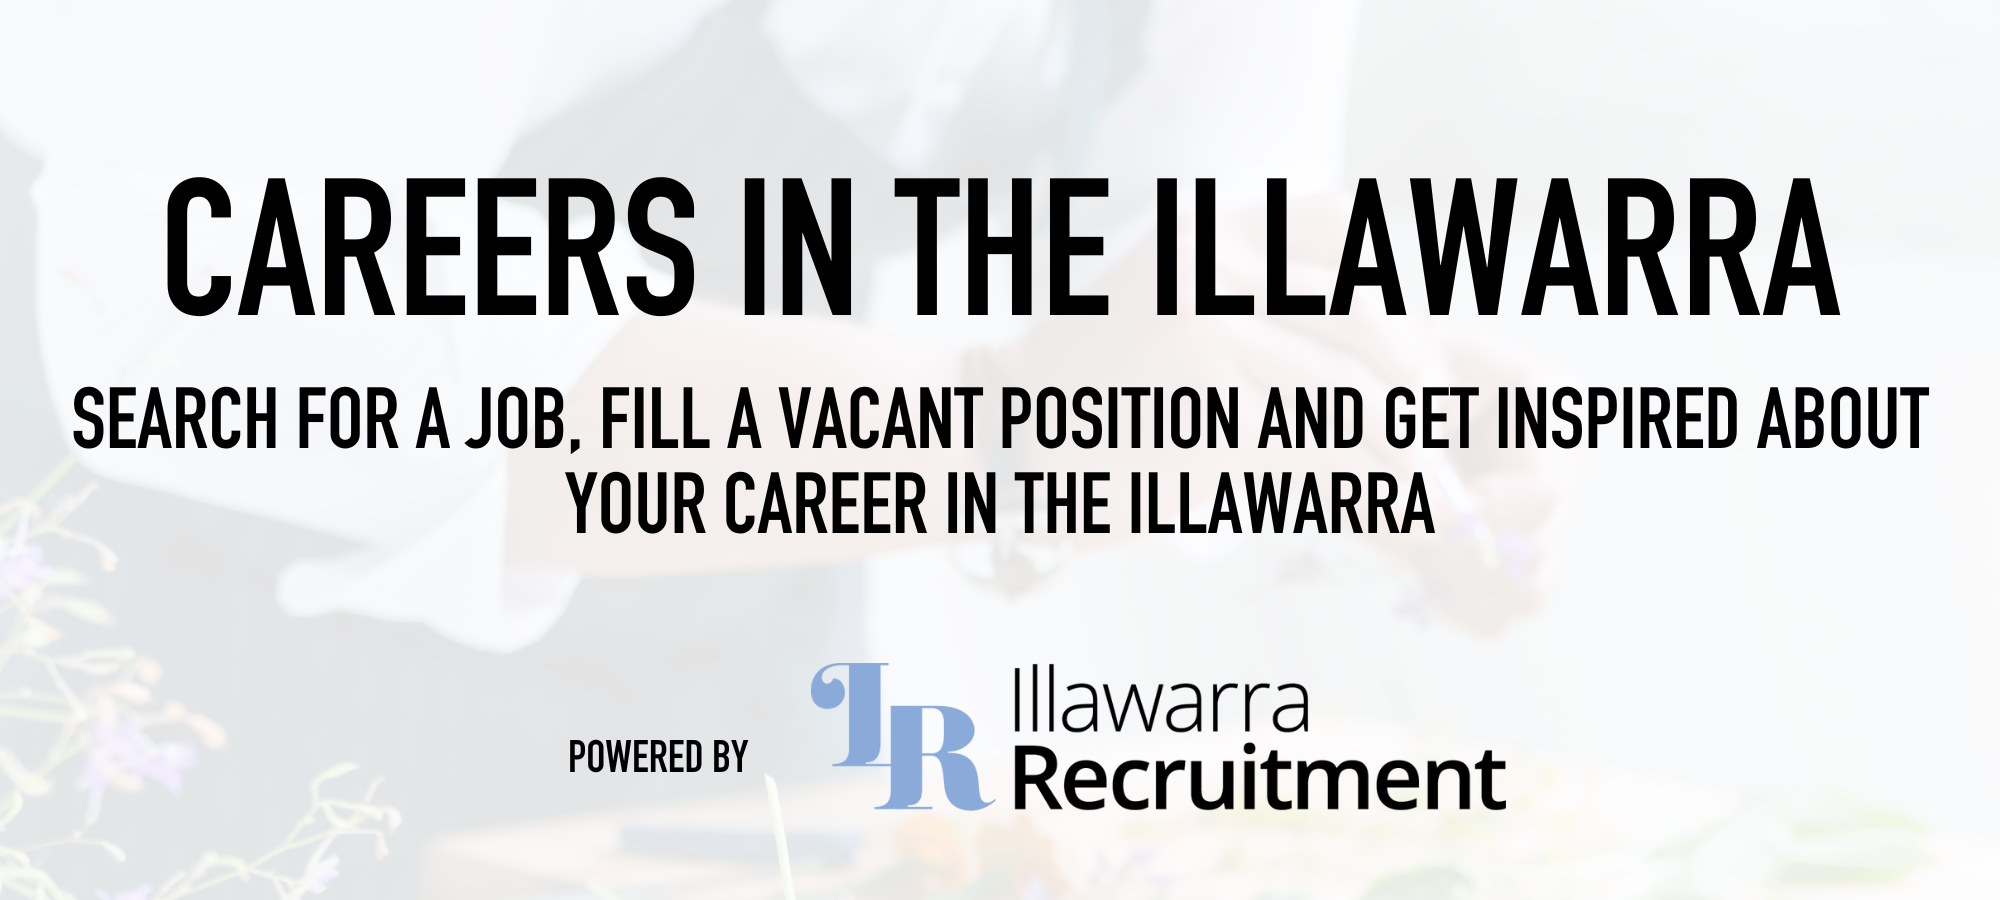 Recruitment and Careers in The Illawarra